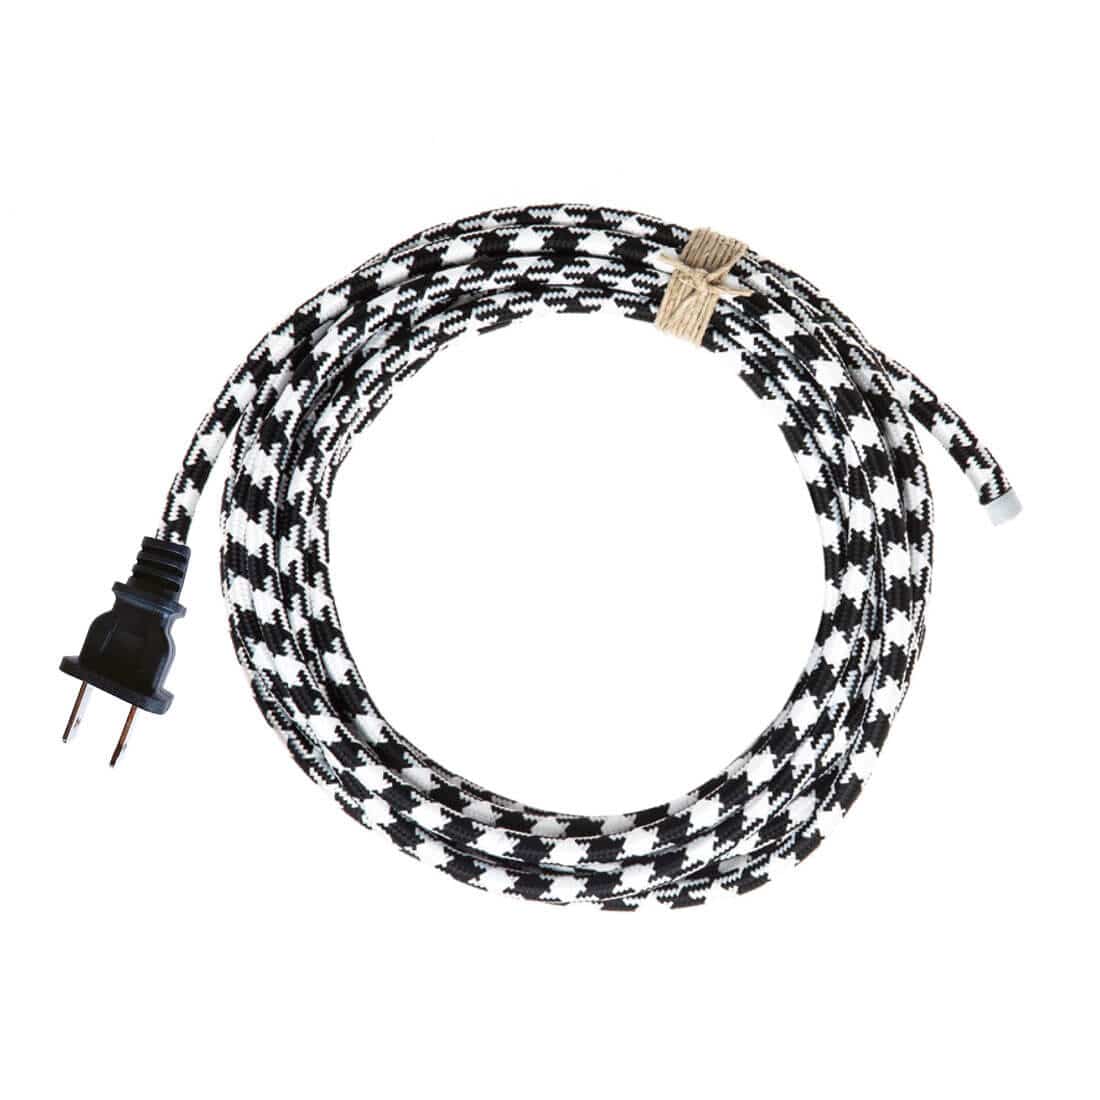 Customize: 2-Prong Power Cord Whip